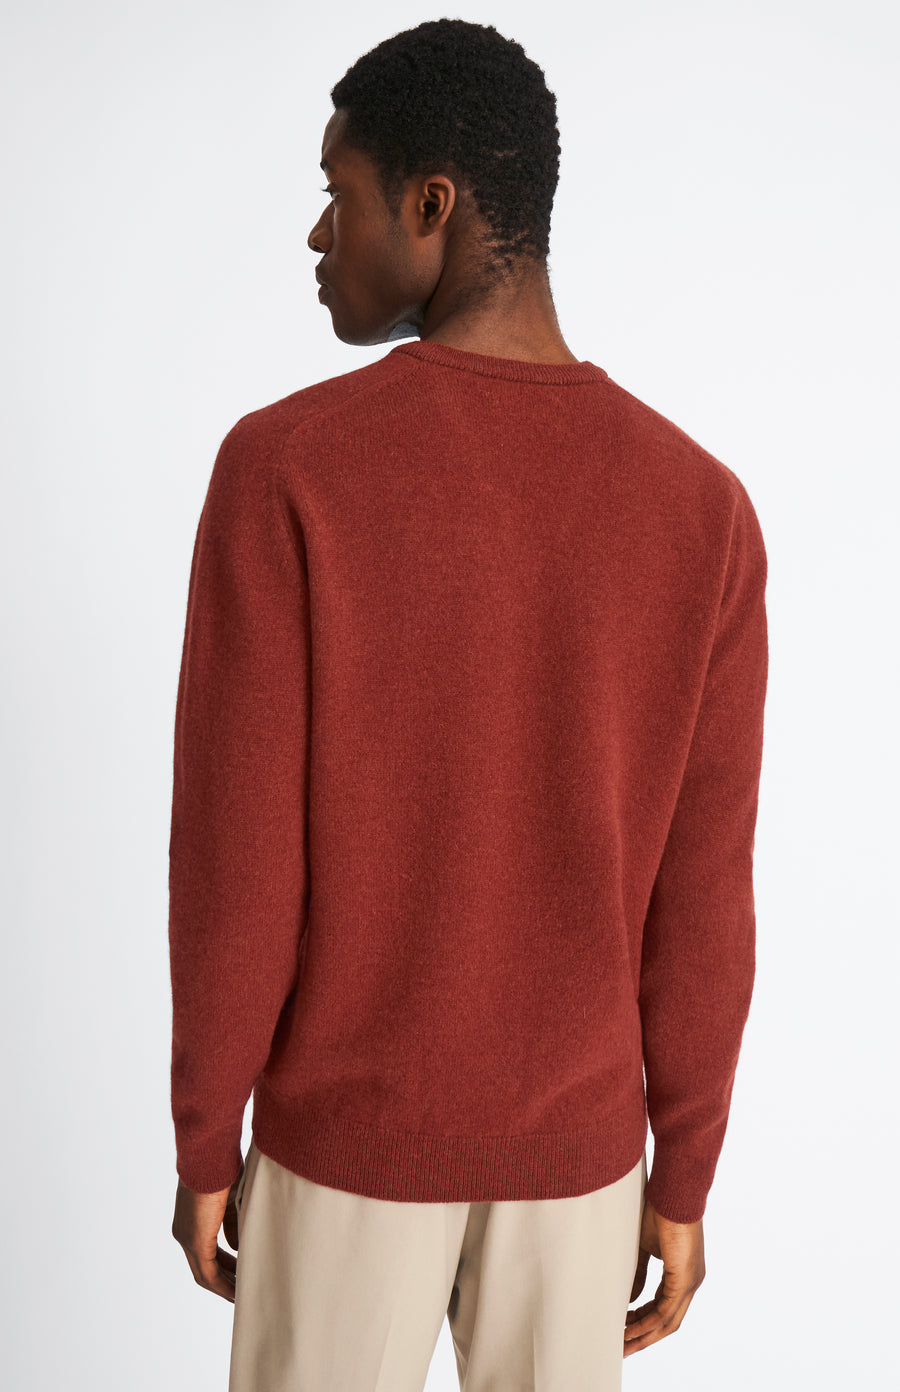 Pringle V Neck Lion Lambswool Jumper In Red Rust & Mineral Green rear view